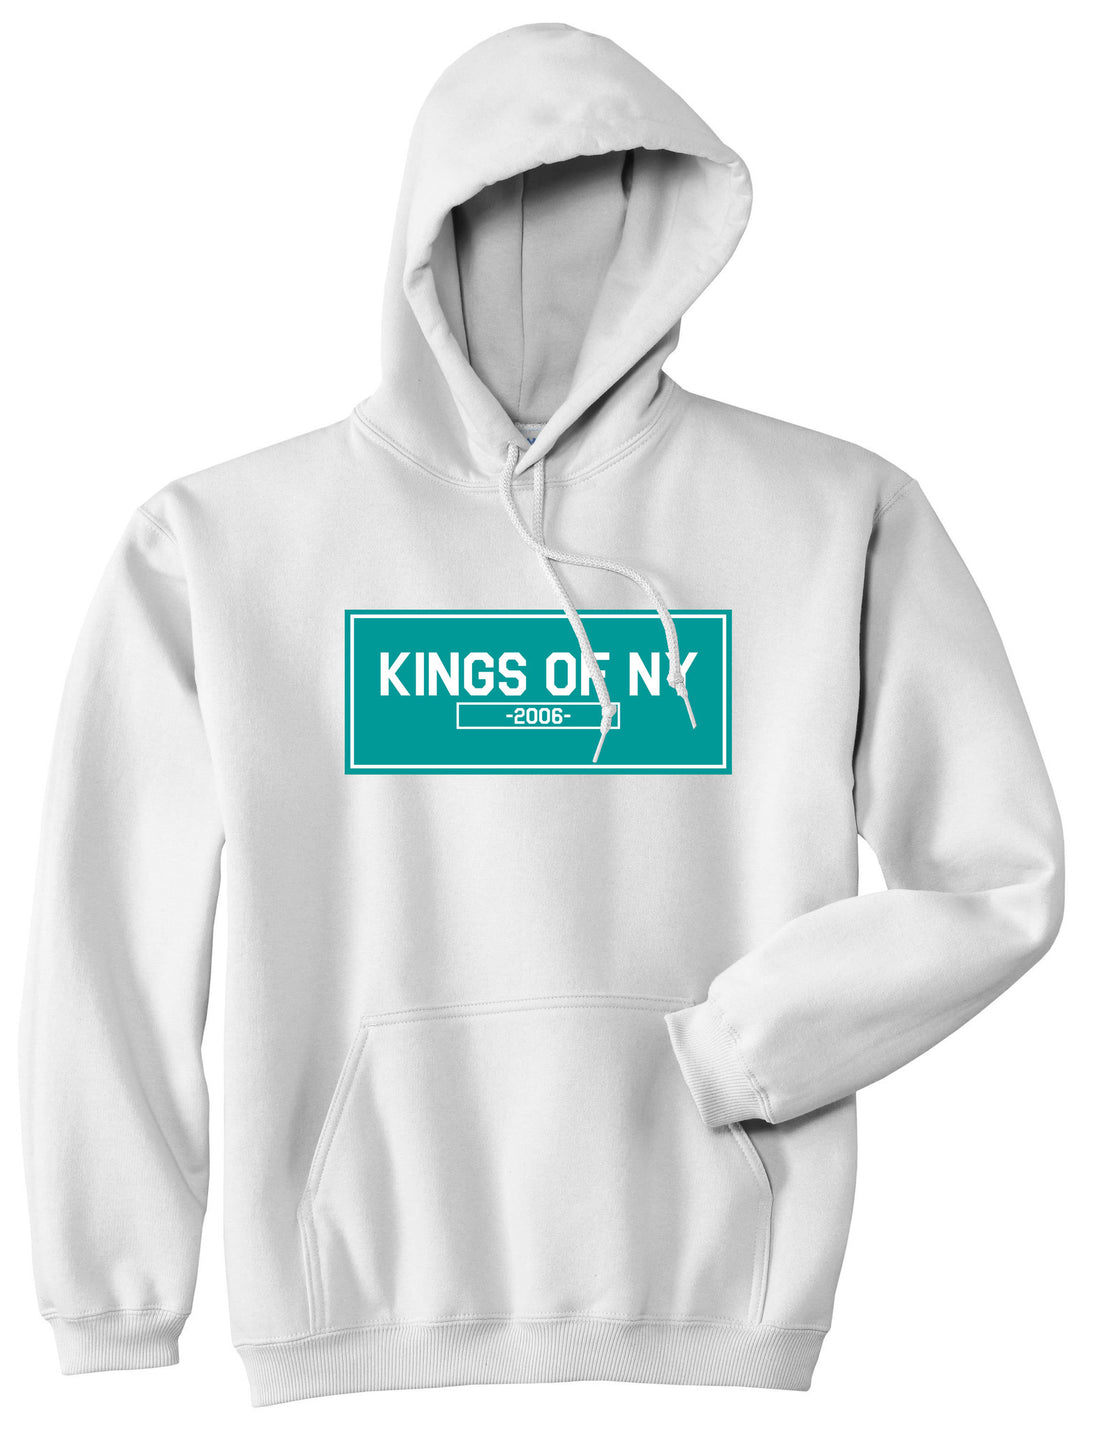 FALL15 Blue Logo Boys Kids Pullover Hoodie Hoody in White by Kings Of NY